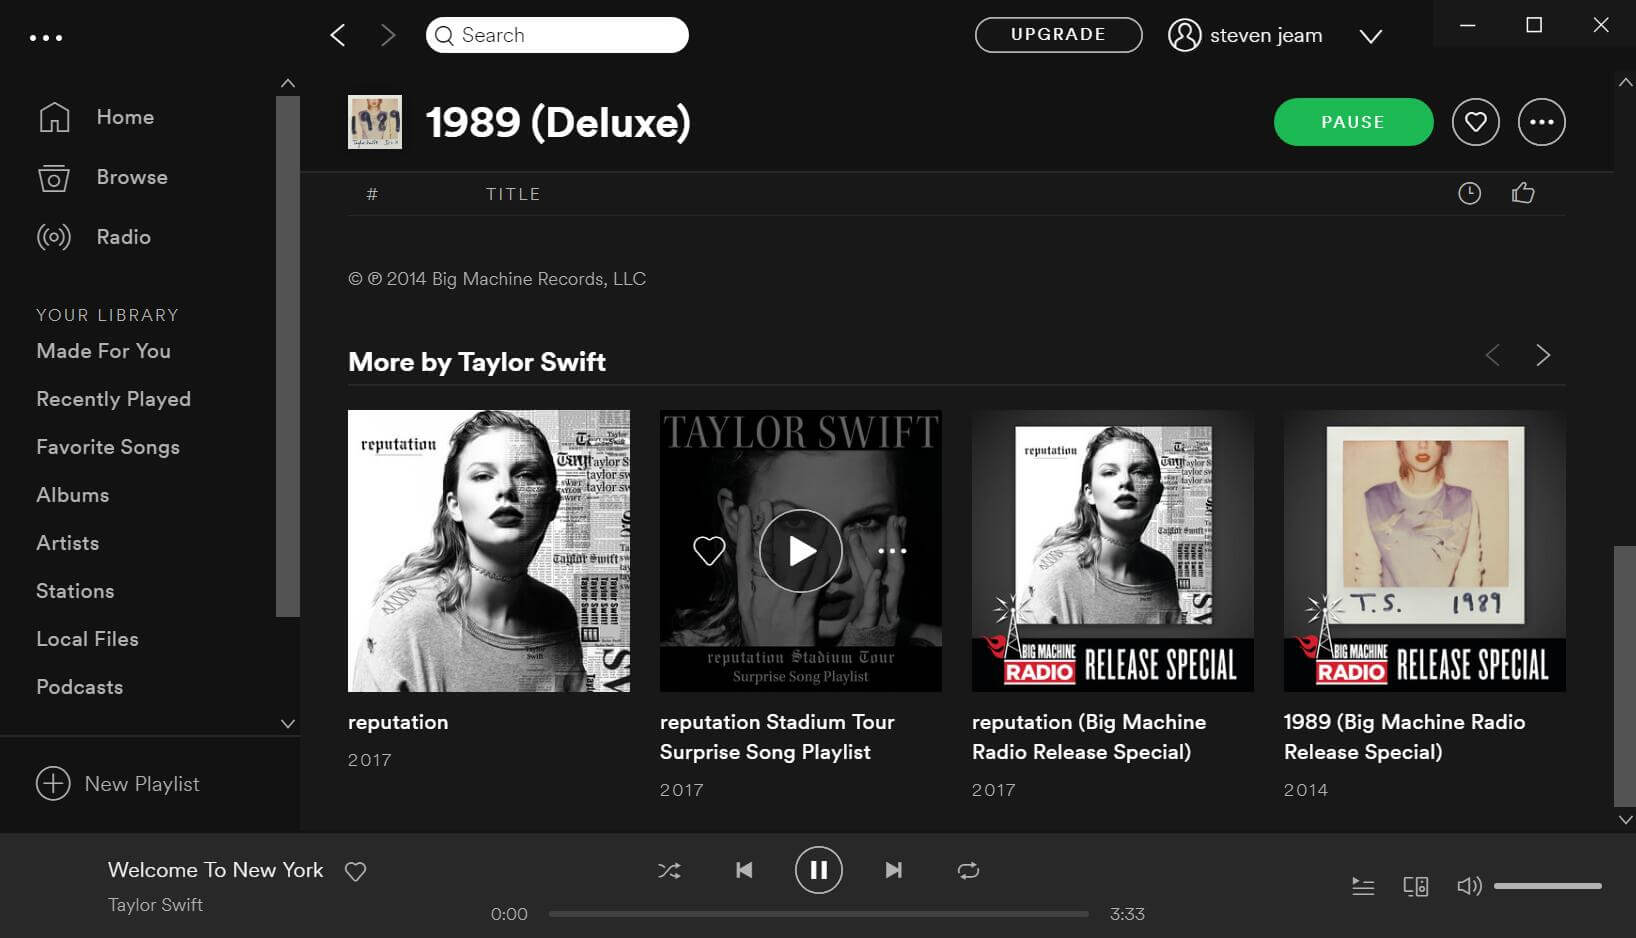 taylor swift album  download from spotify